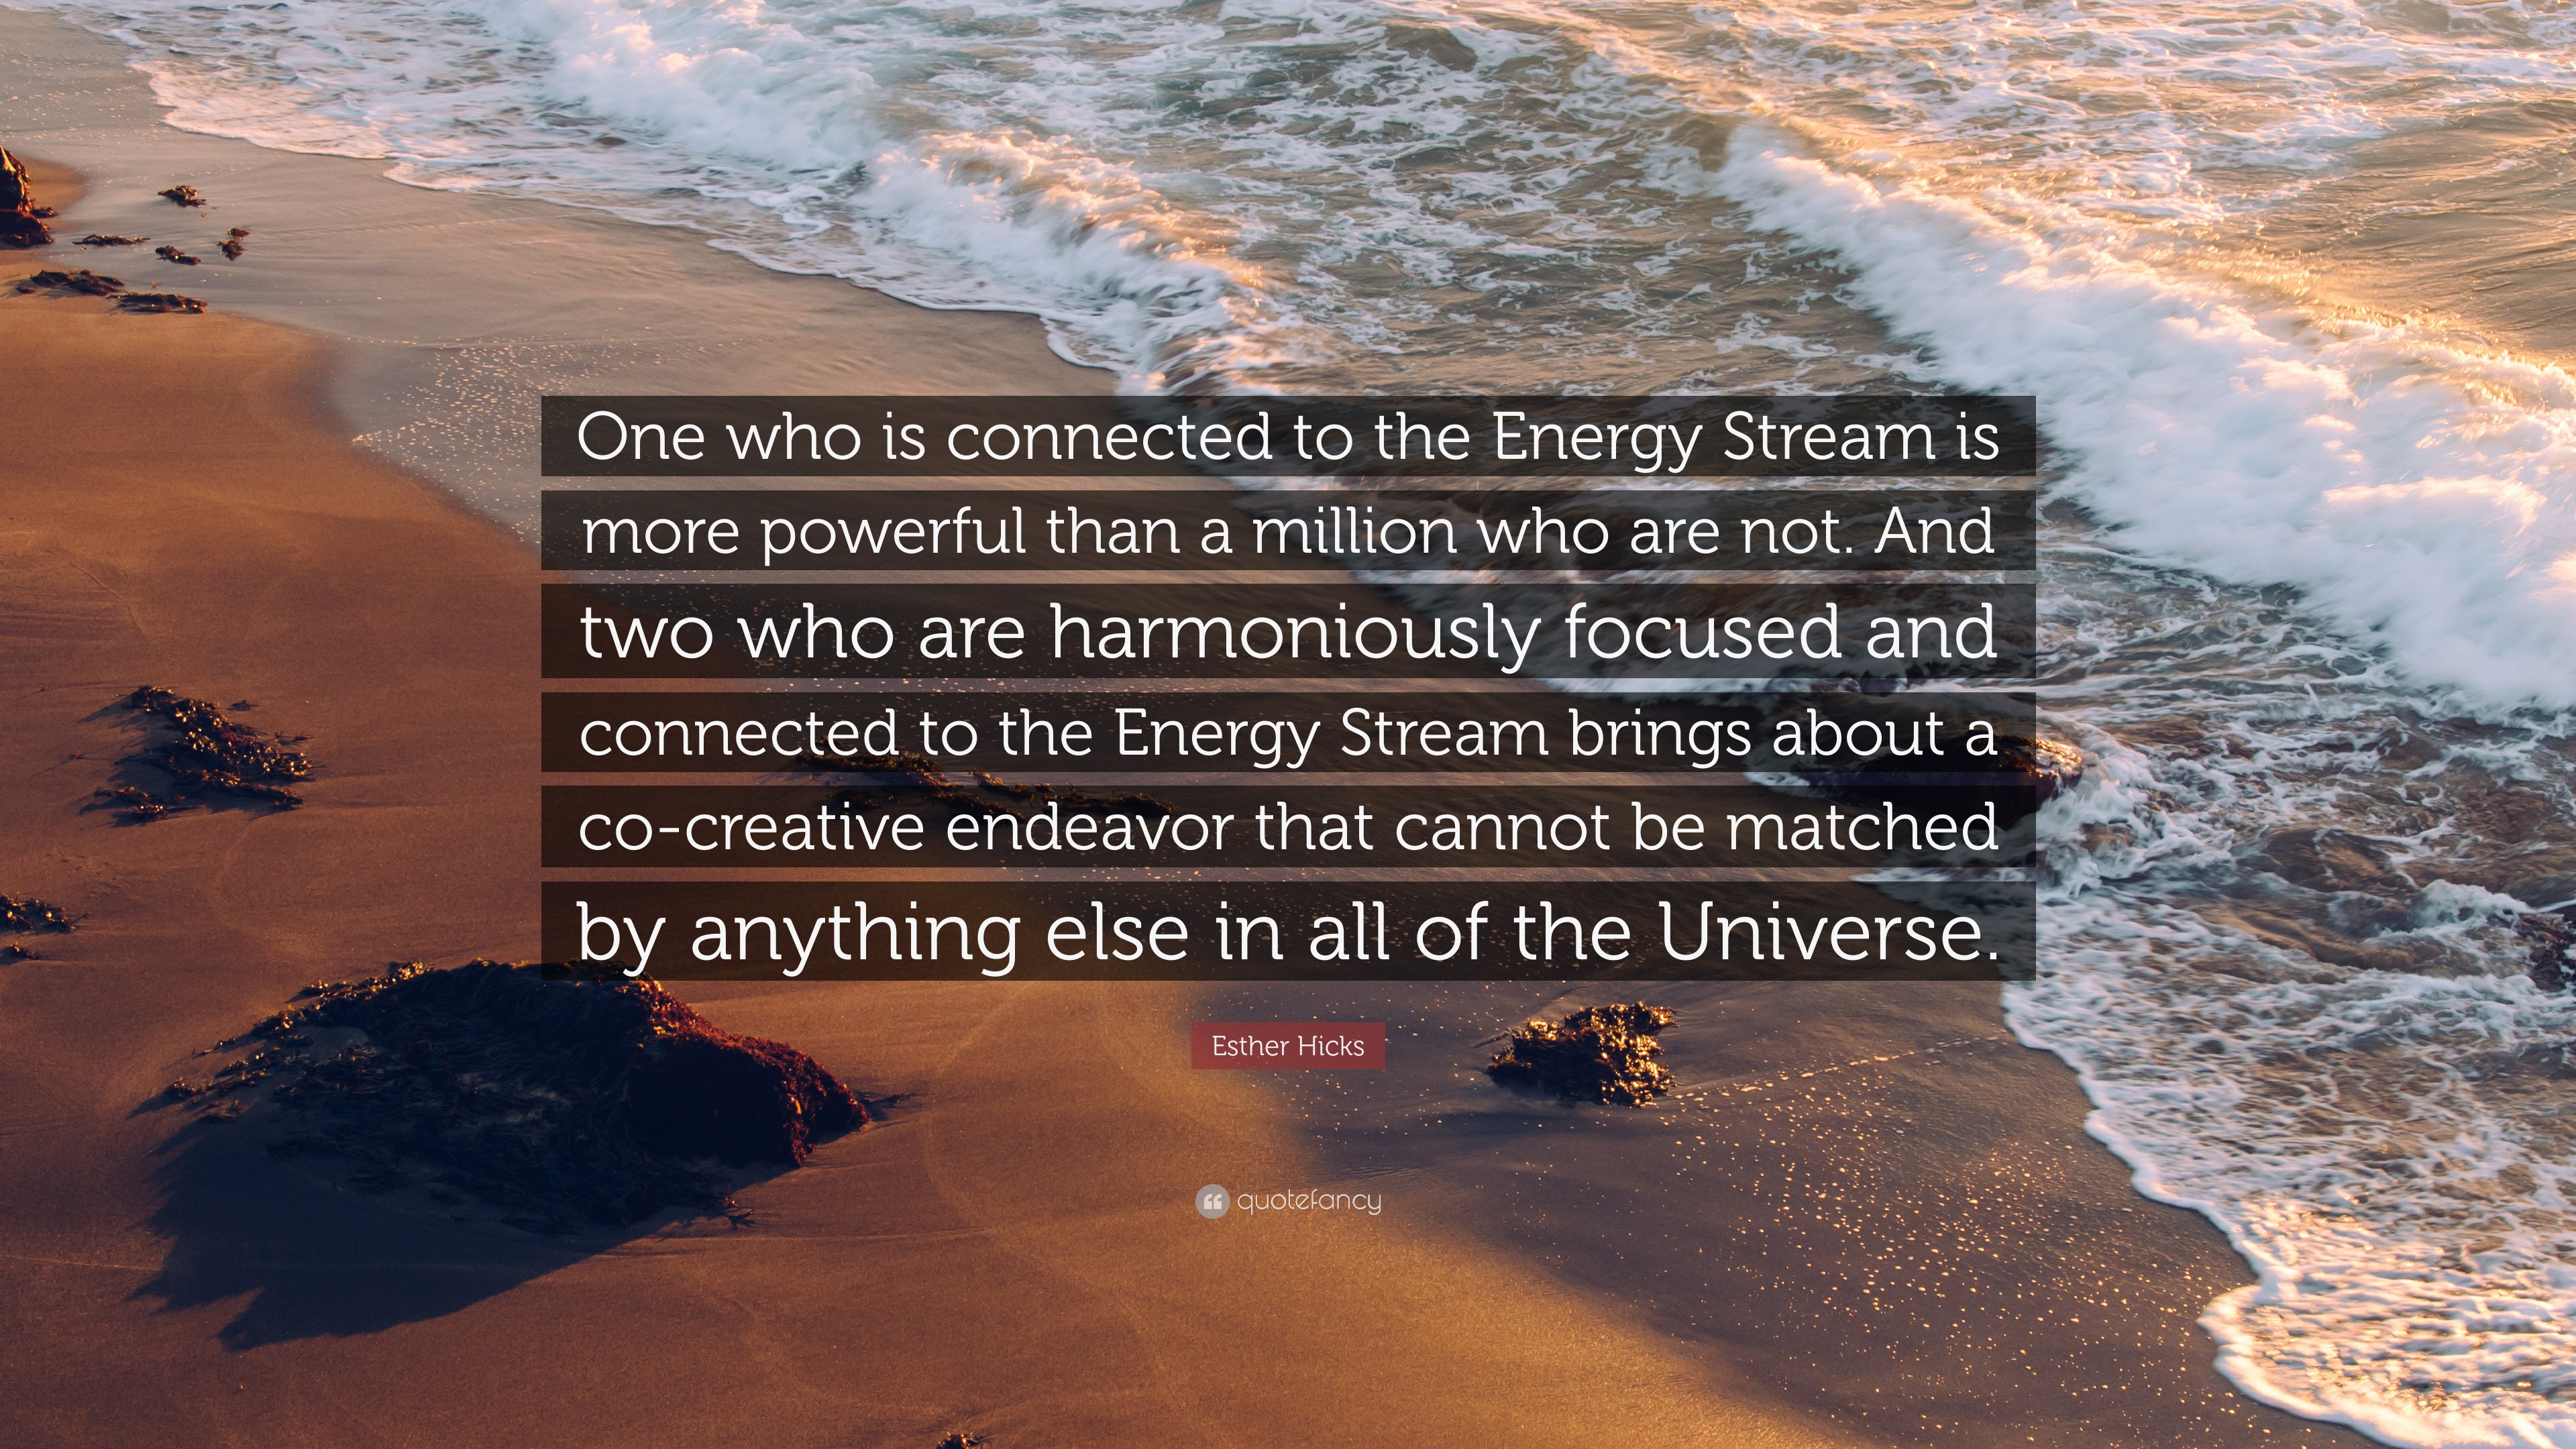 Esther Hicks Quote: “One who is connected to the Energy Stream is more  powerful than a million who are not. And two who are harmoniously focu...”